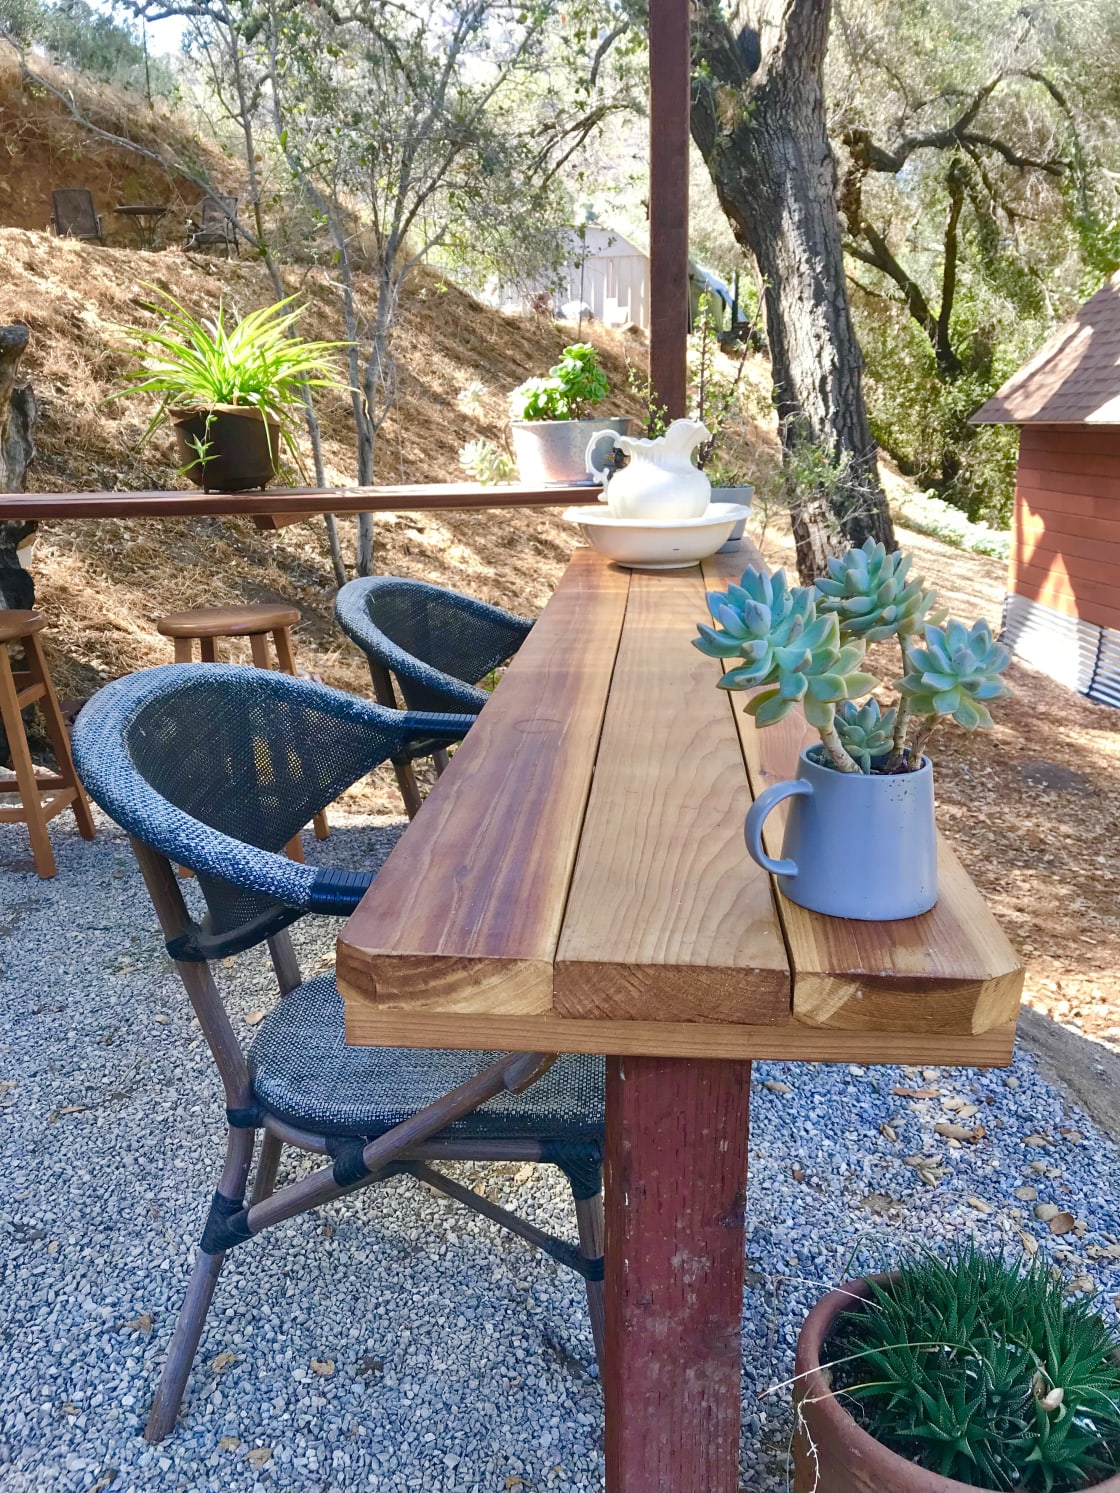 Seating in the outdoor kitchen